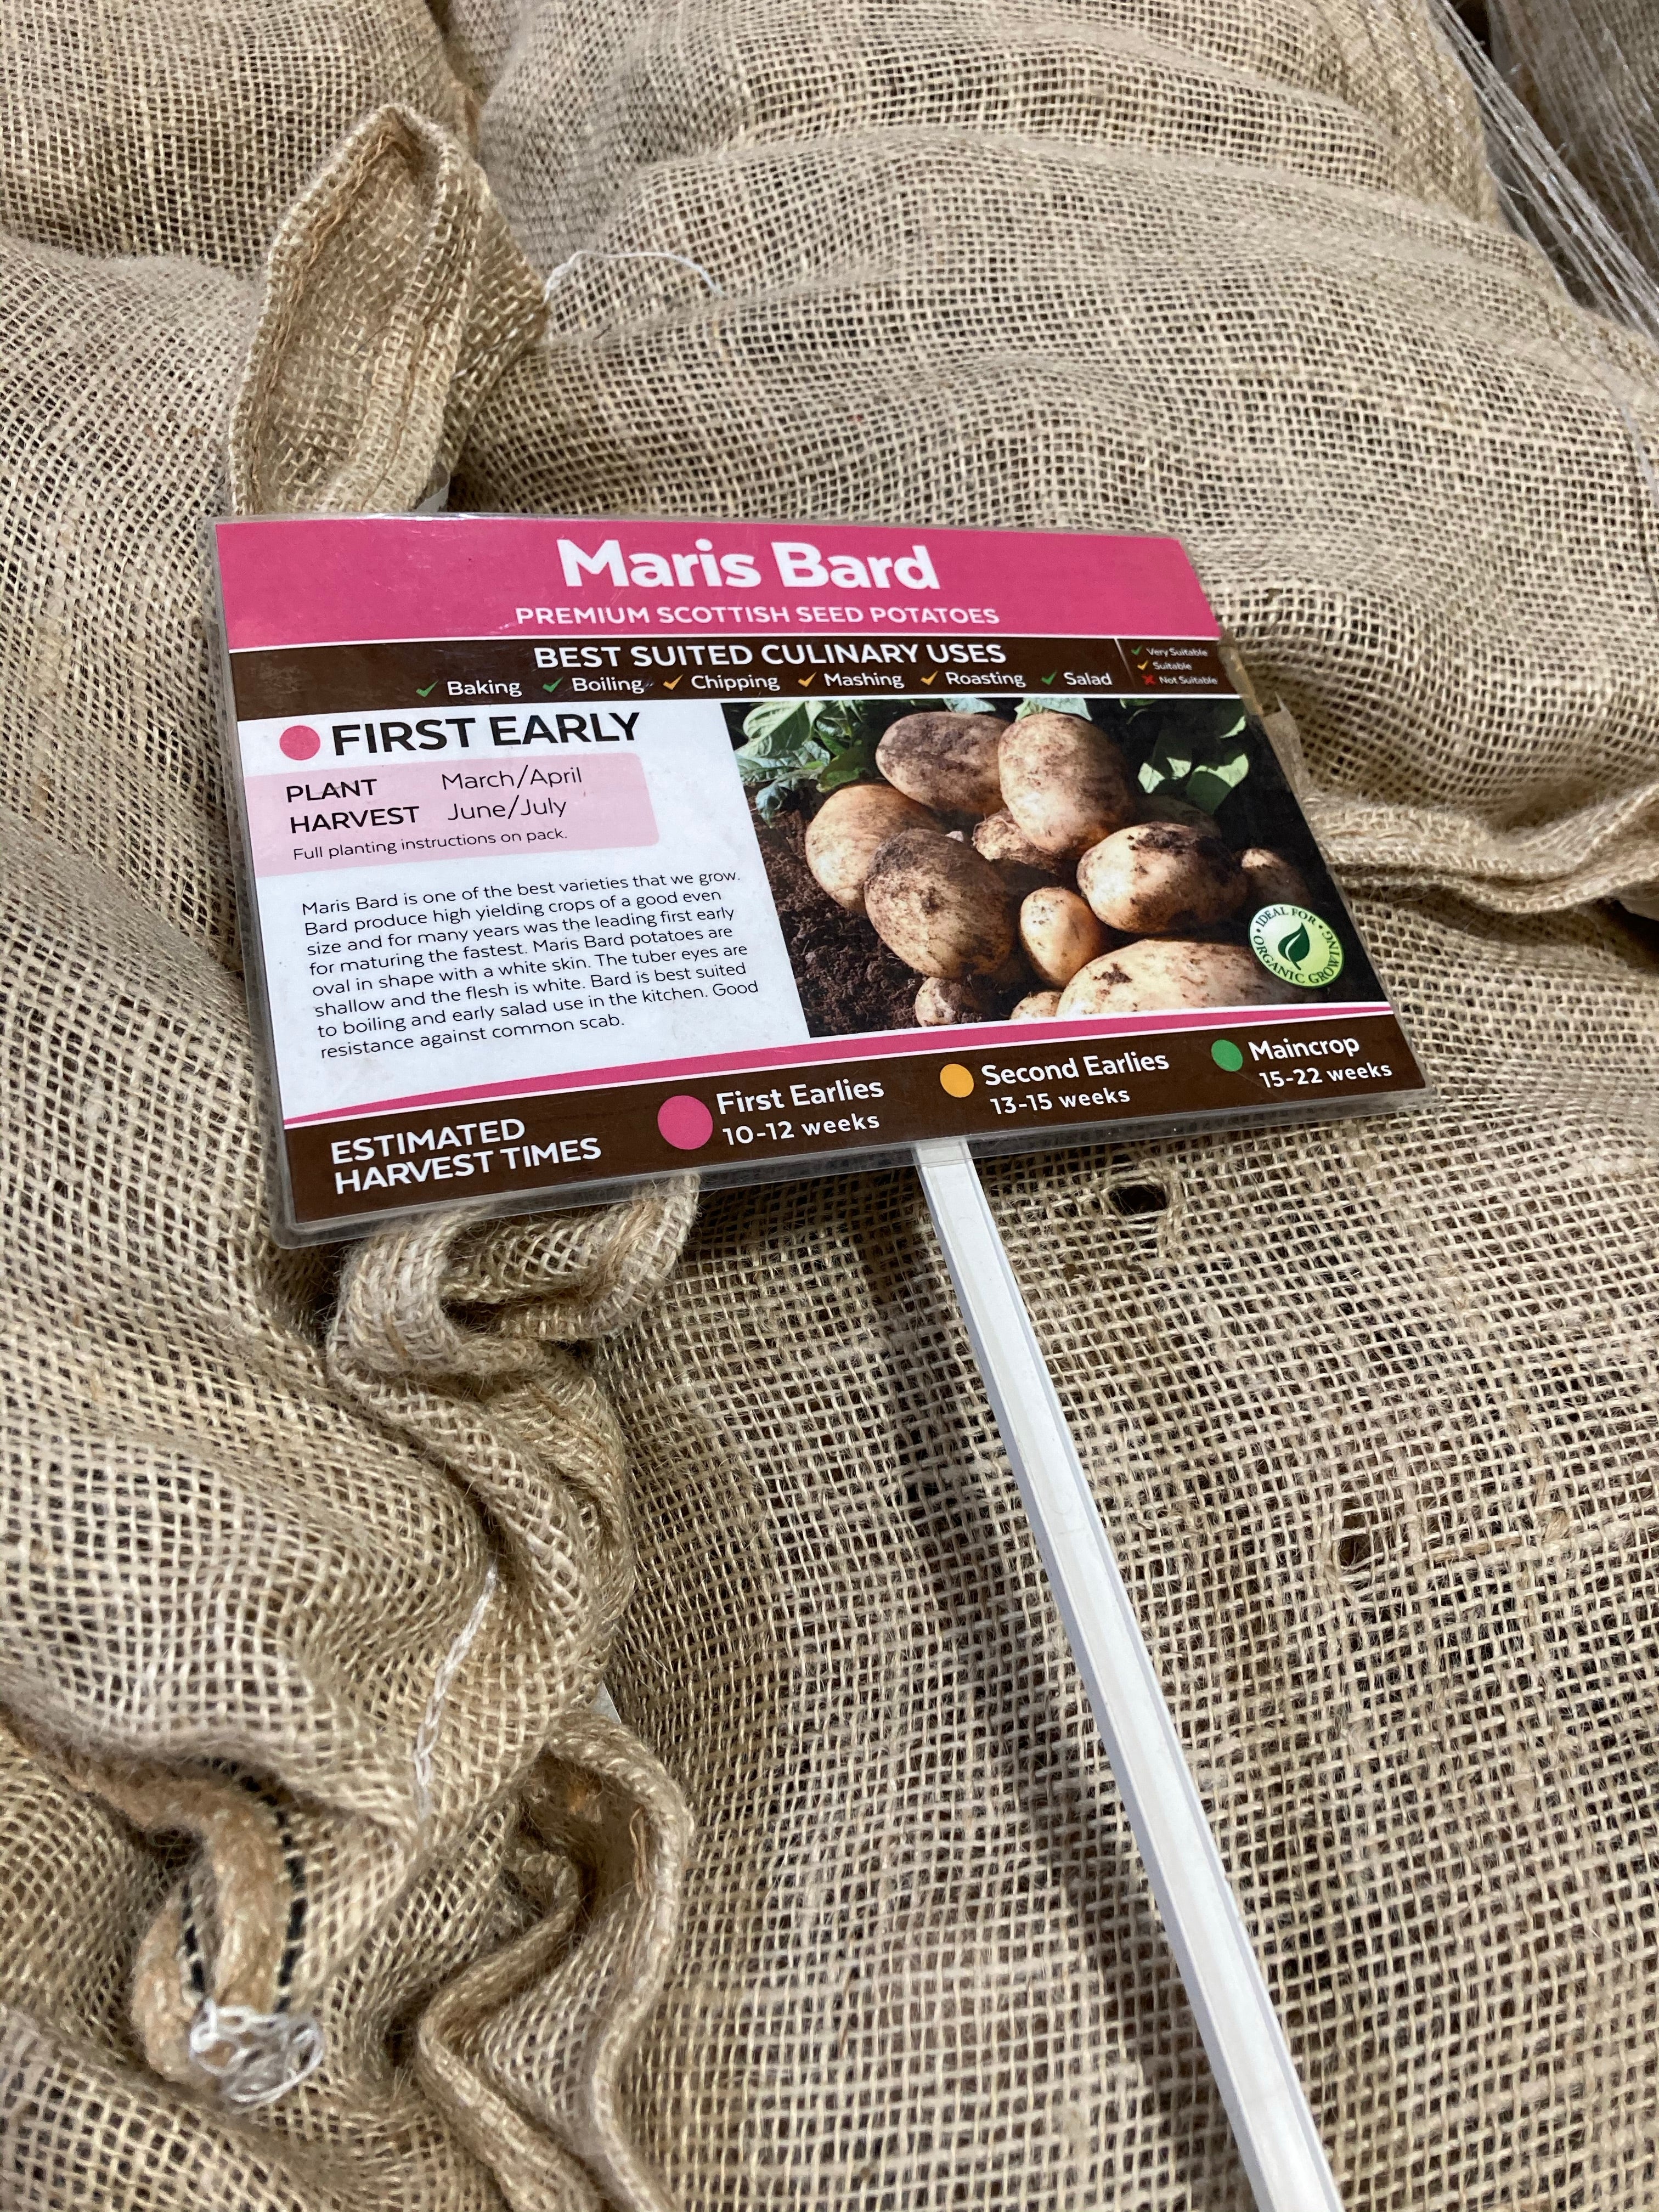 Seed Potatoes for Planting 'Maris Bard' First Early Variety (Free UK Postage)